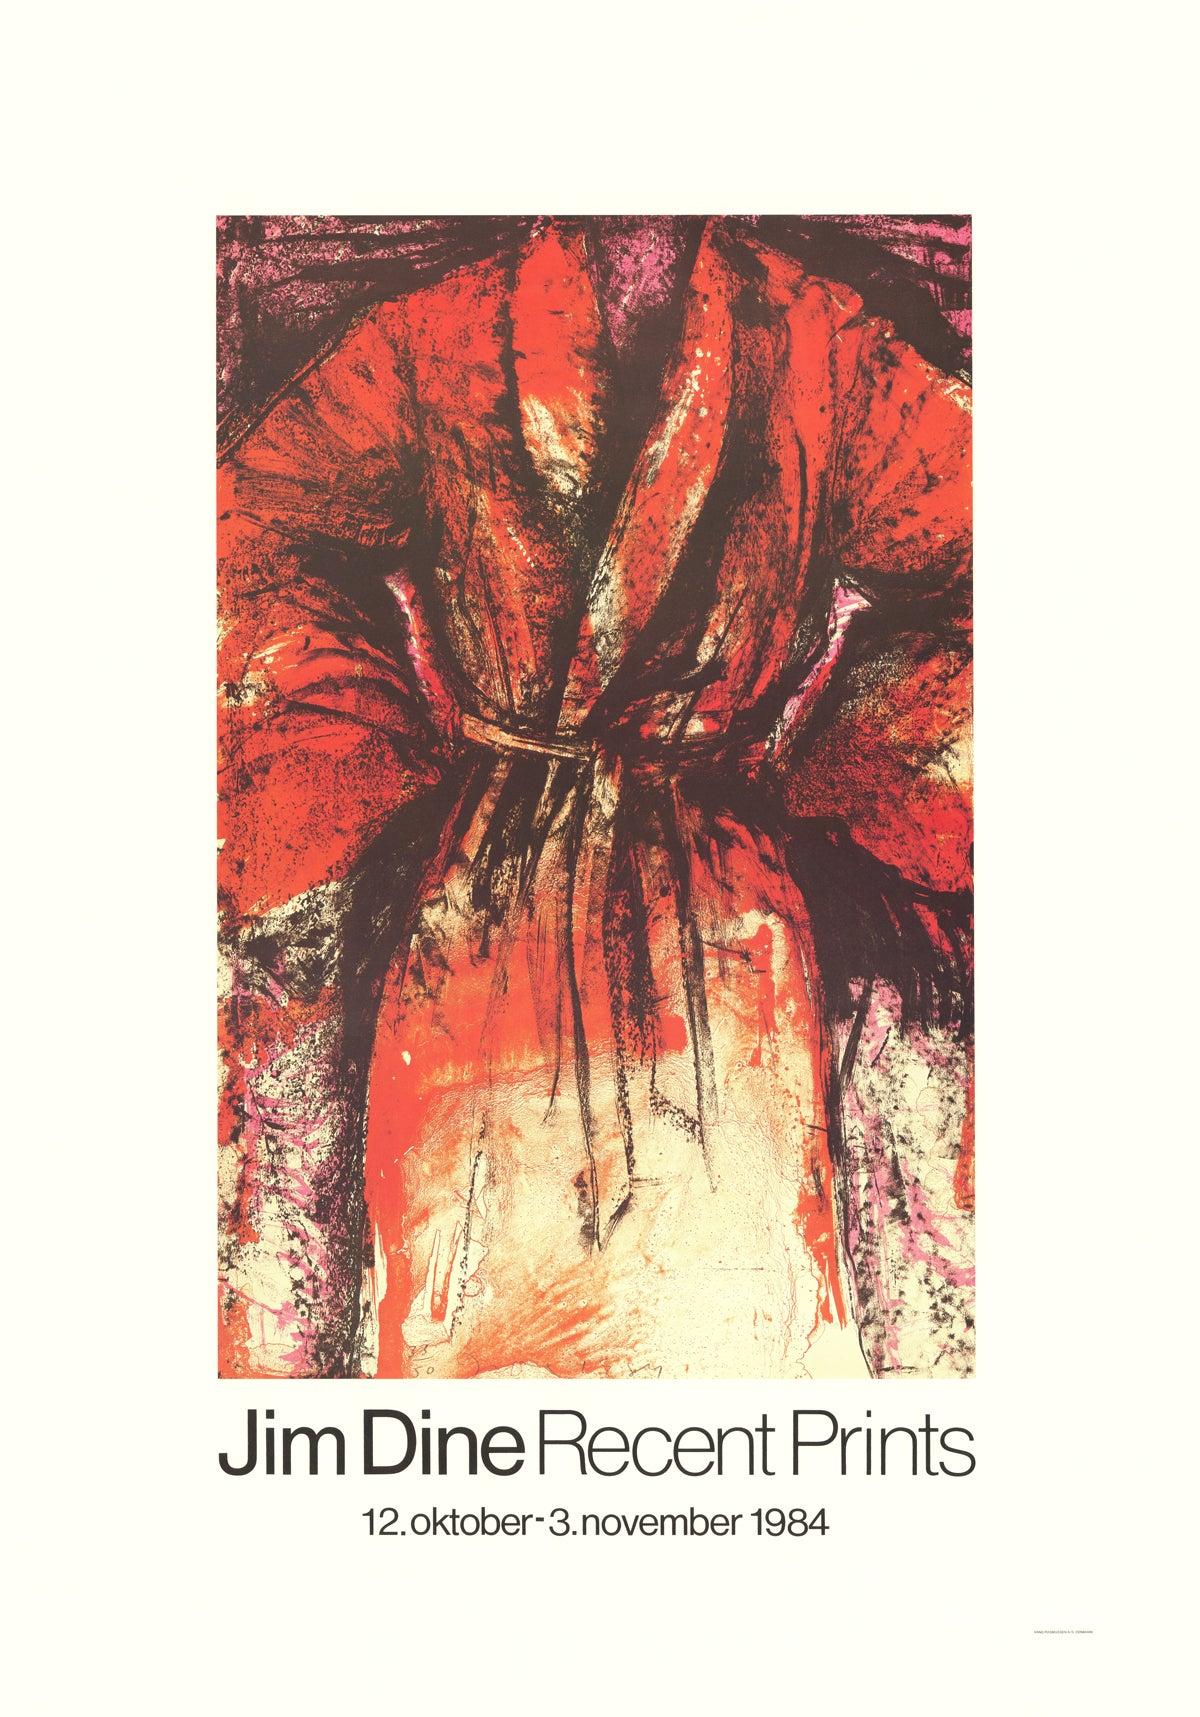 Paper Size: 34.75 x 24.75 inches ( 88.265 x 62.865 cm )
 Image Size: 22.5 x 14.75 inches ( 57.15 x 37.465 cm )

Jim Dine's exhibition in Denmark and the accompanying poster of a robe for "Recent Prints" at Vang Rasmusen A/S reflect the artist's